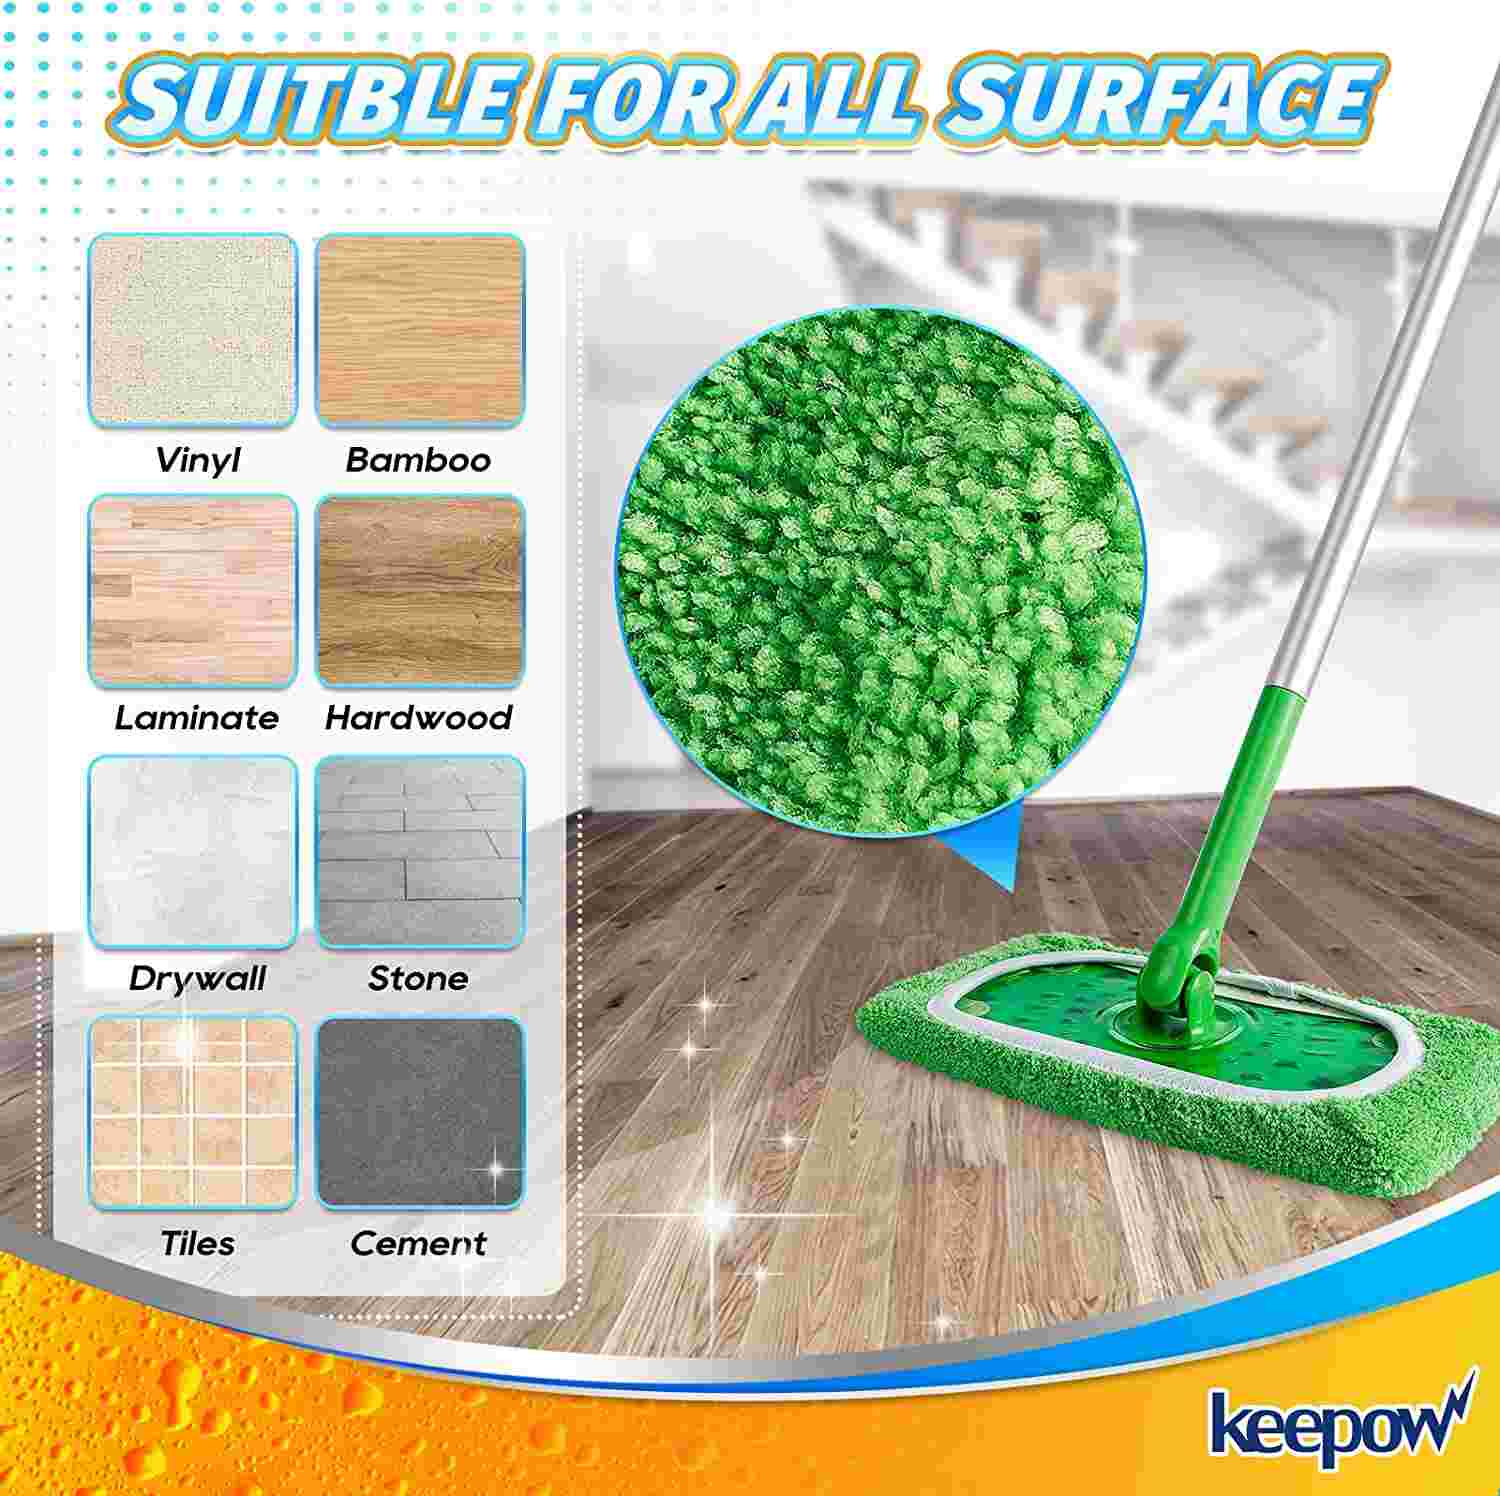 KEEPOW Reusable Wet Pads Compatible with Swiffer Sweeper Mop, Dry Sweeping Cloths, Washable Microfiber Wet Mopping Cloth Refills for Surface/Hardwood Floor Cleaning, 8 Pack 